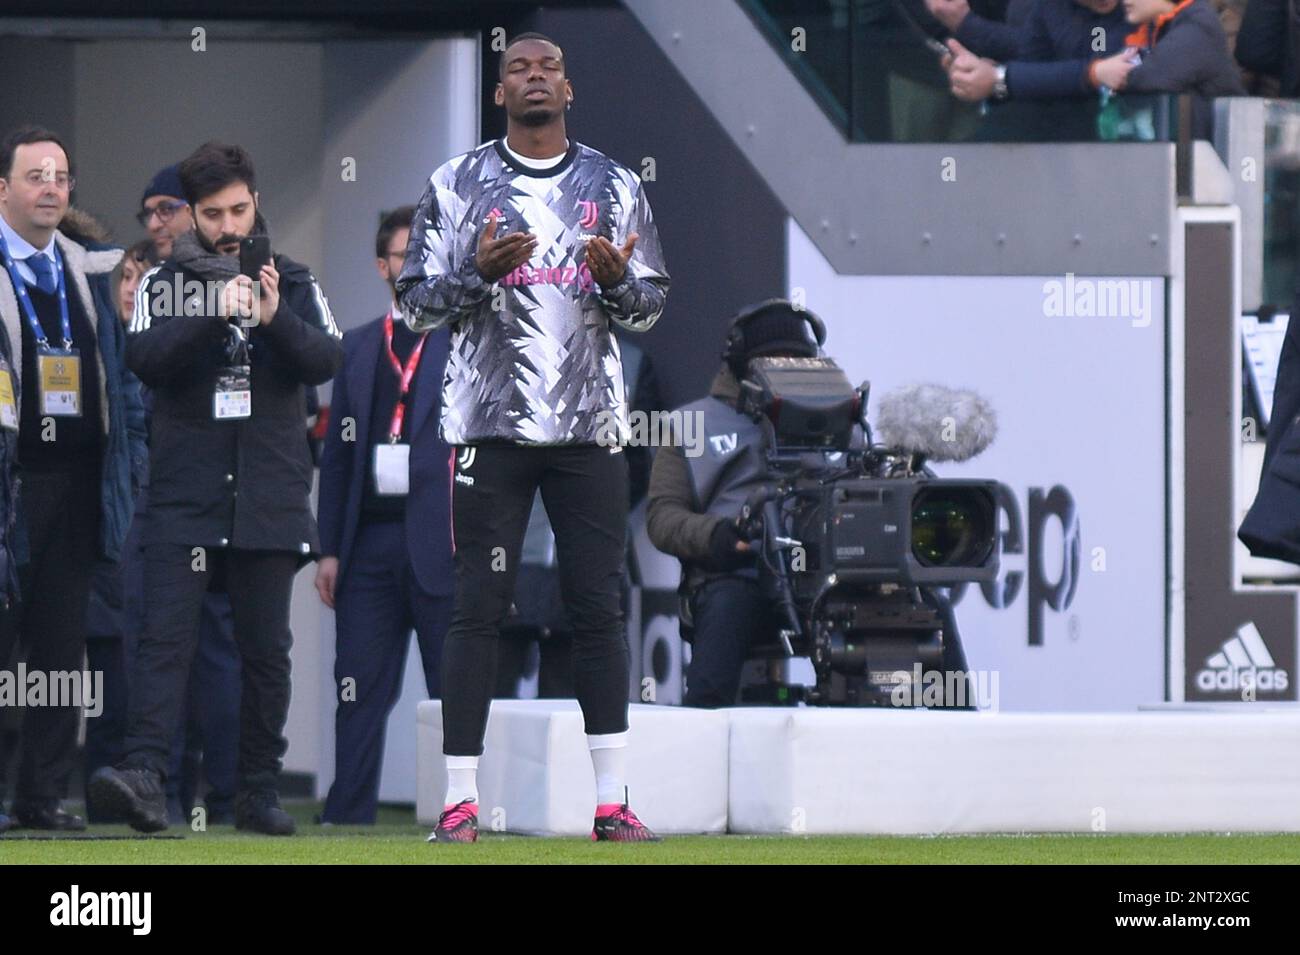 Paul Pogba (Juventus) prays as he returns to the pitch for a warm-up after a six-month injury break during the Serie A Football match between Juventus Stock Photo